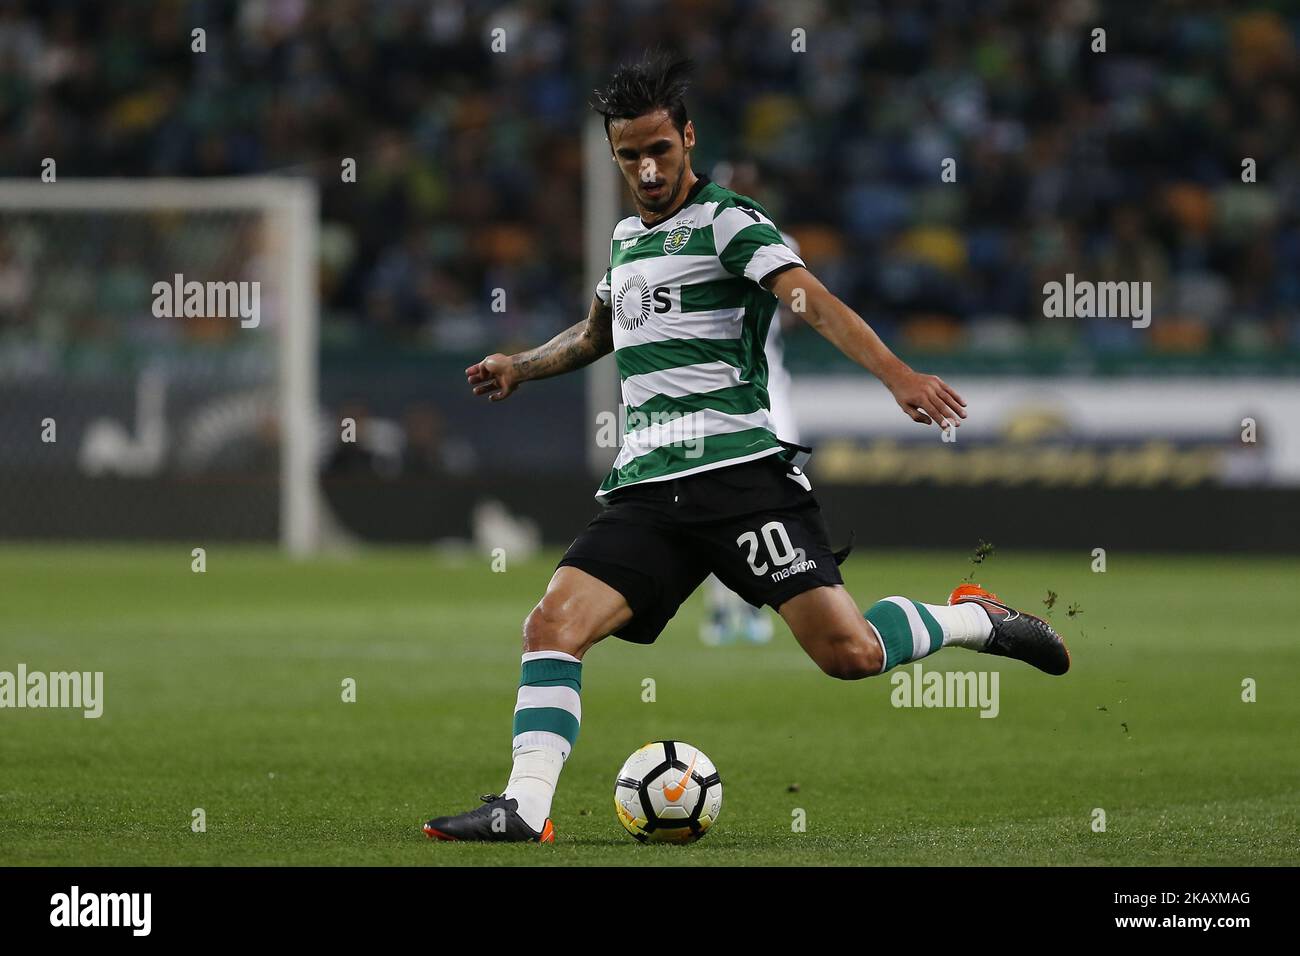 Sporting CP Midfielder Bryan Ruiz from Costa Rica during the Premier League 2017/18 match between Sporting CP and Boavista FC, at Alvalade Stadium in Lisbon on April 22, 2018. (Photo by Paulo Nascimento / DPI / NurPhoto) Stock Photo